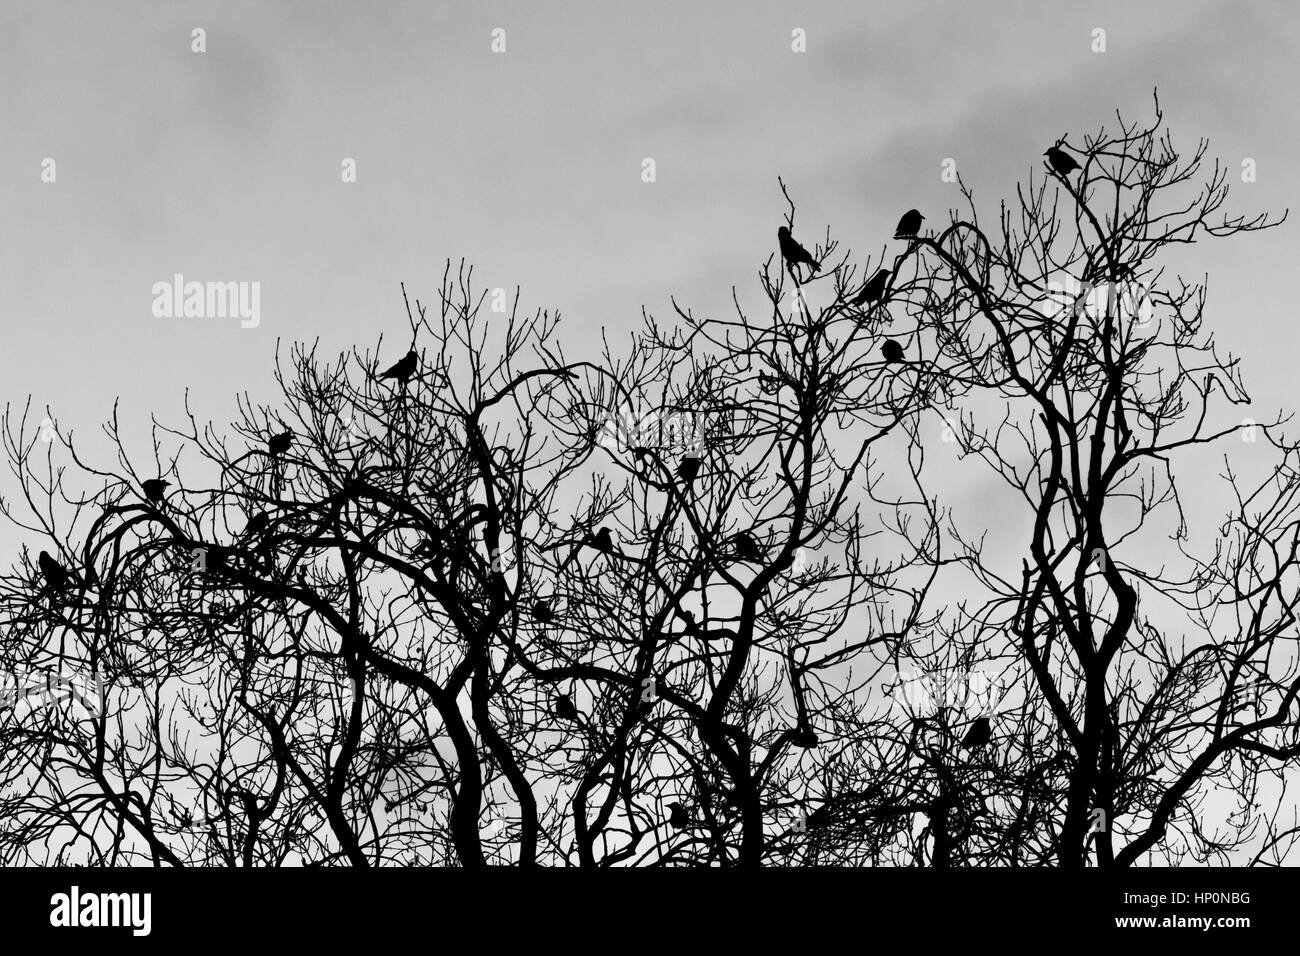 Rooks (Corvus frugilegus) roosting in tree in evening. Flock of birds in crow family (Corvidae) perched in canopy of deciduous tree, black and white Stock Photo